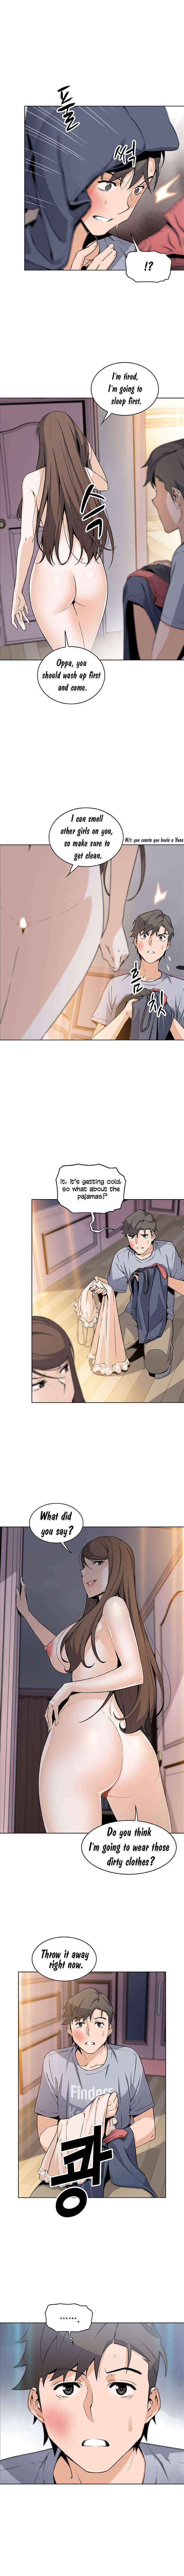 Housekeeper Manhwa - Chapter 42 Page 5